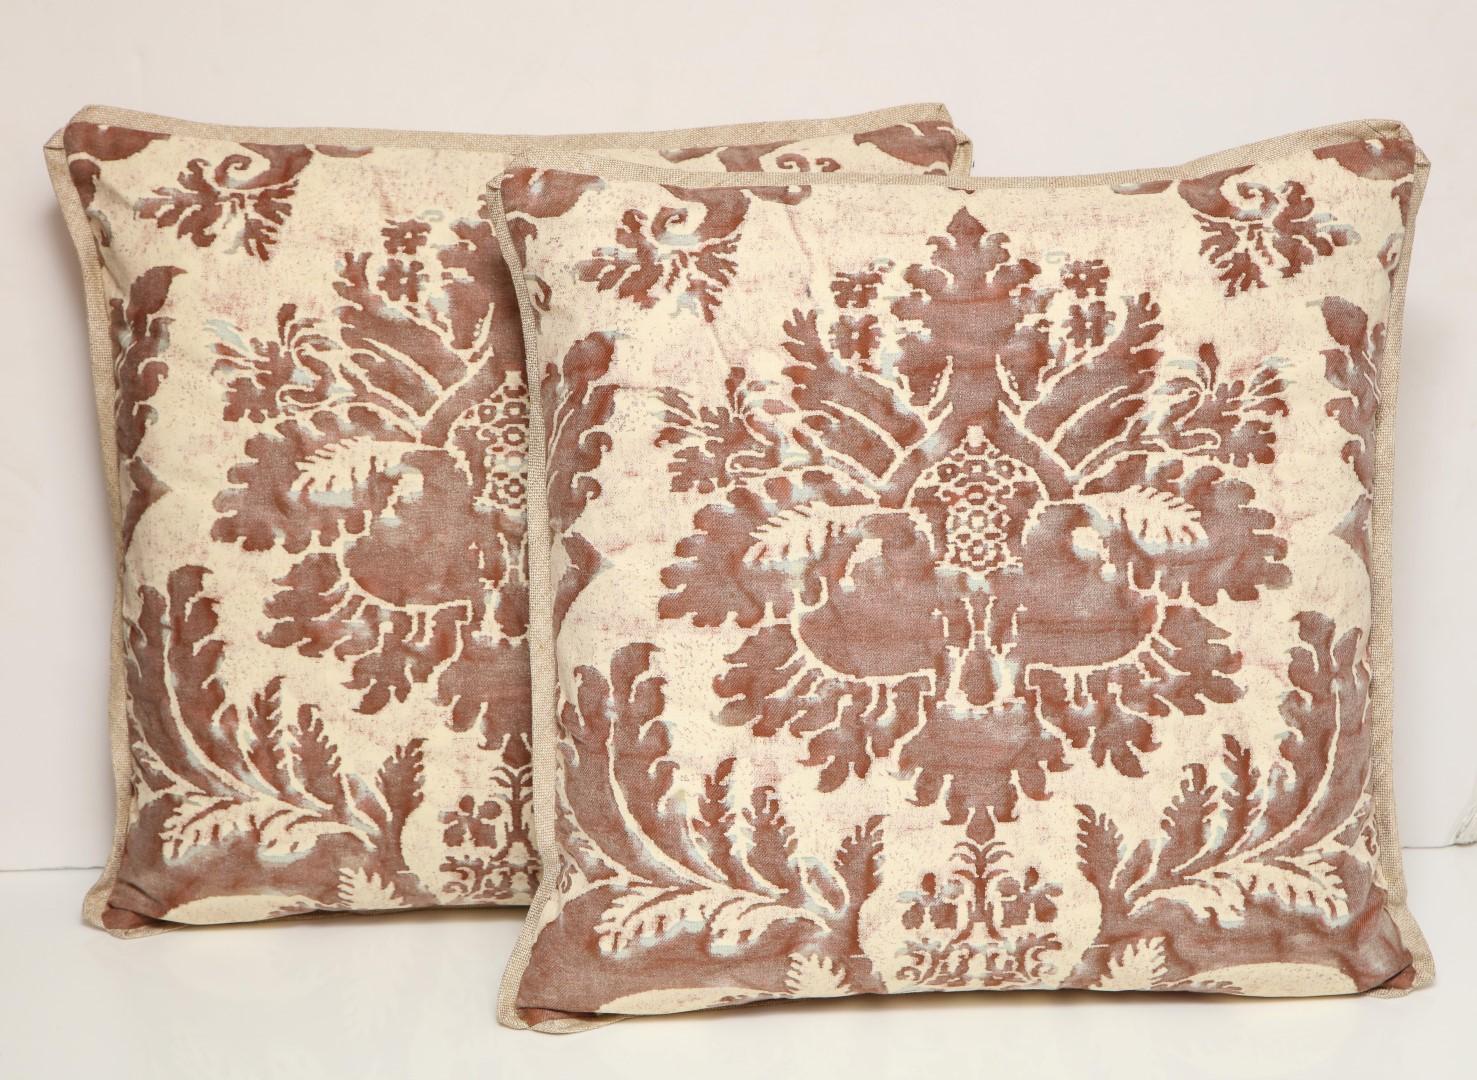 A pair of Fortuny fabric cushions in the Glicine pattern, caramel and white color way, cotton/linen blend backing material and striped silk bias edging, the pattern, 17th century Italian design with Wisteria motif. Newly made using vintage Fortuny